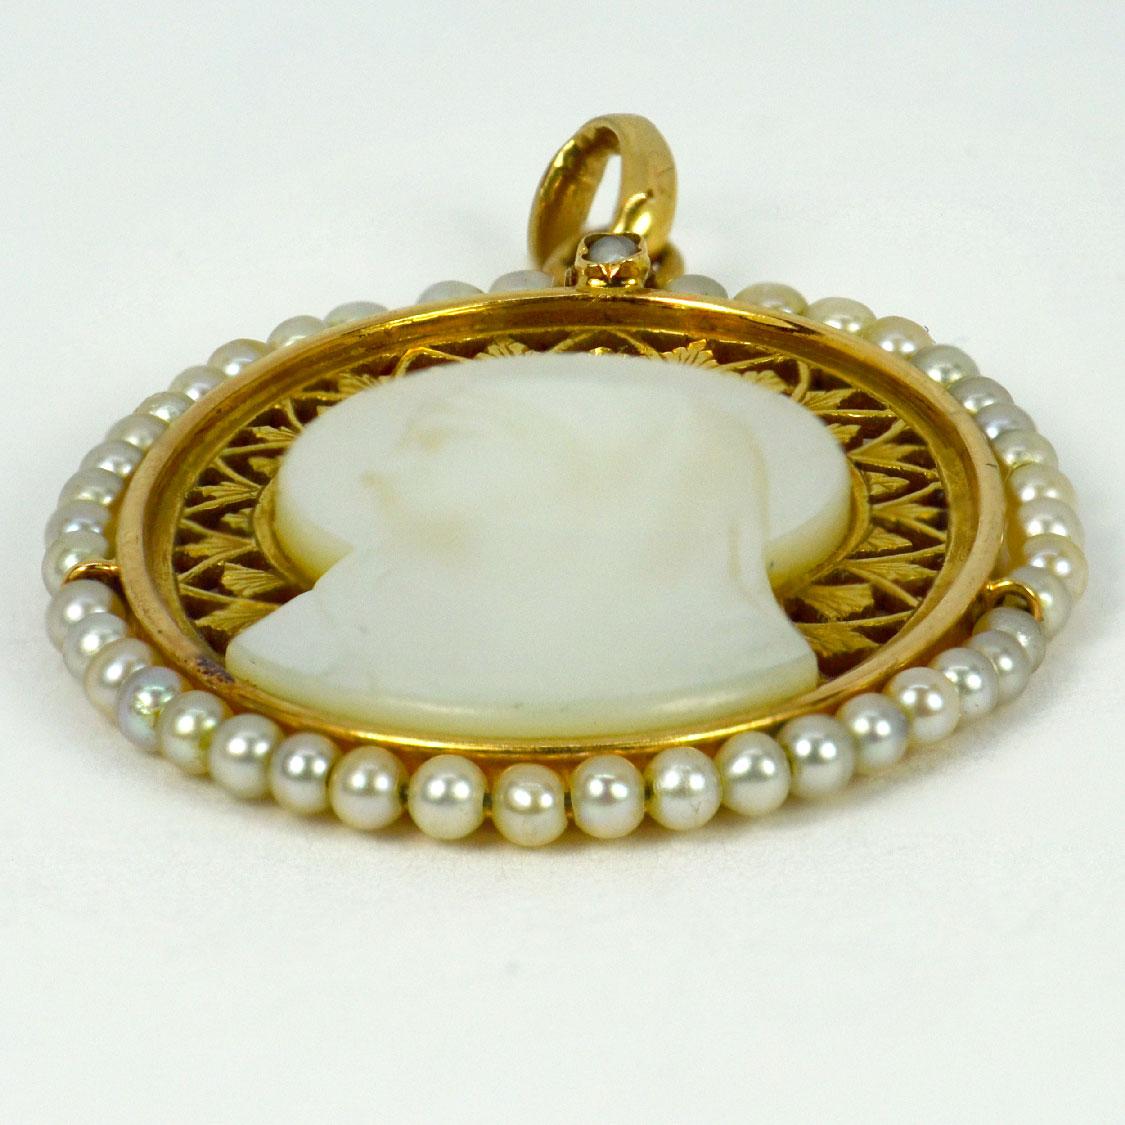 A French 18 karat (18K) yellow gold charm pendant designed as an oval representing the Virgin Mary as a Mother-of-Pearl cameo set in a pierced frame of roses, surrounded by 43 natural white seed pearls with a single seed pearl collet set to the top.